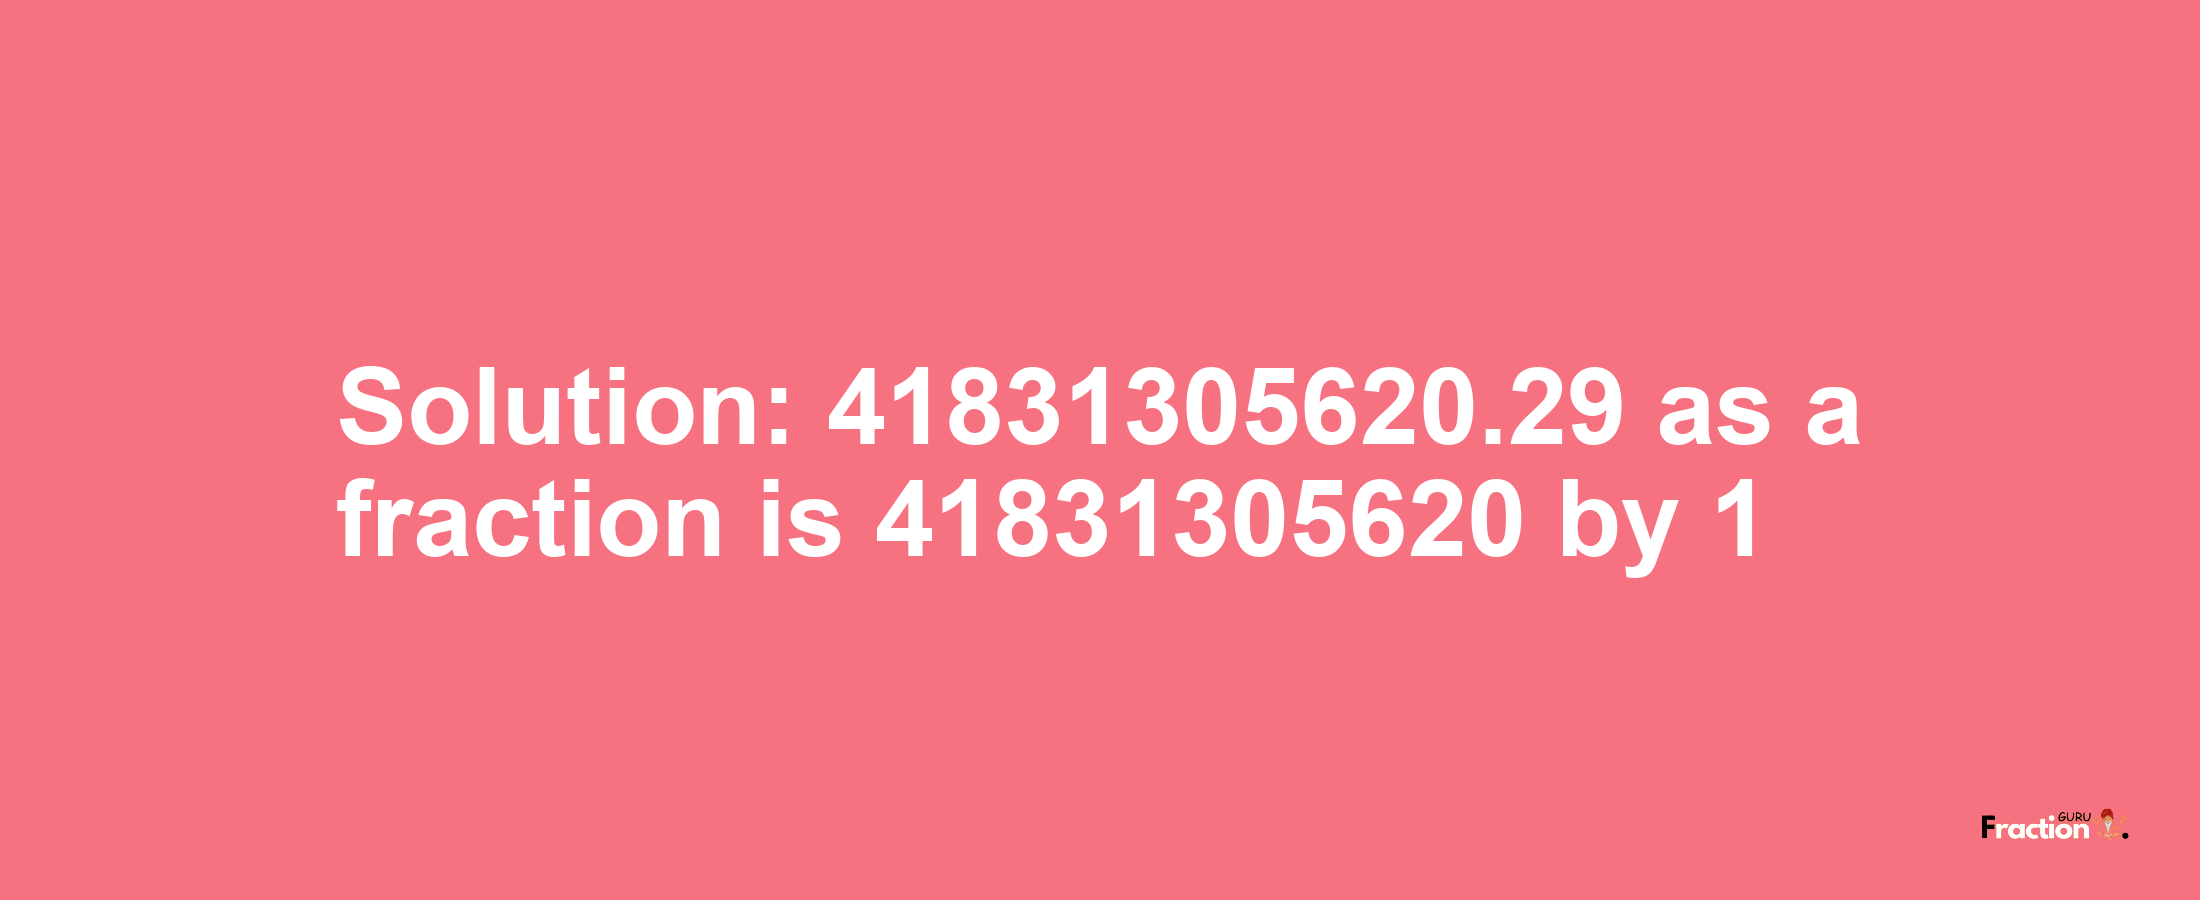 Solution:41831305620.29 as a fraction is 41831305620/1